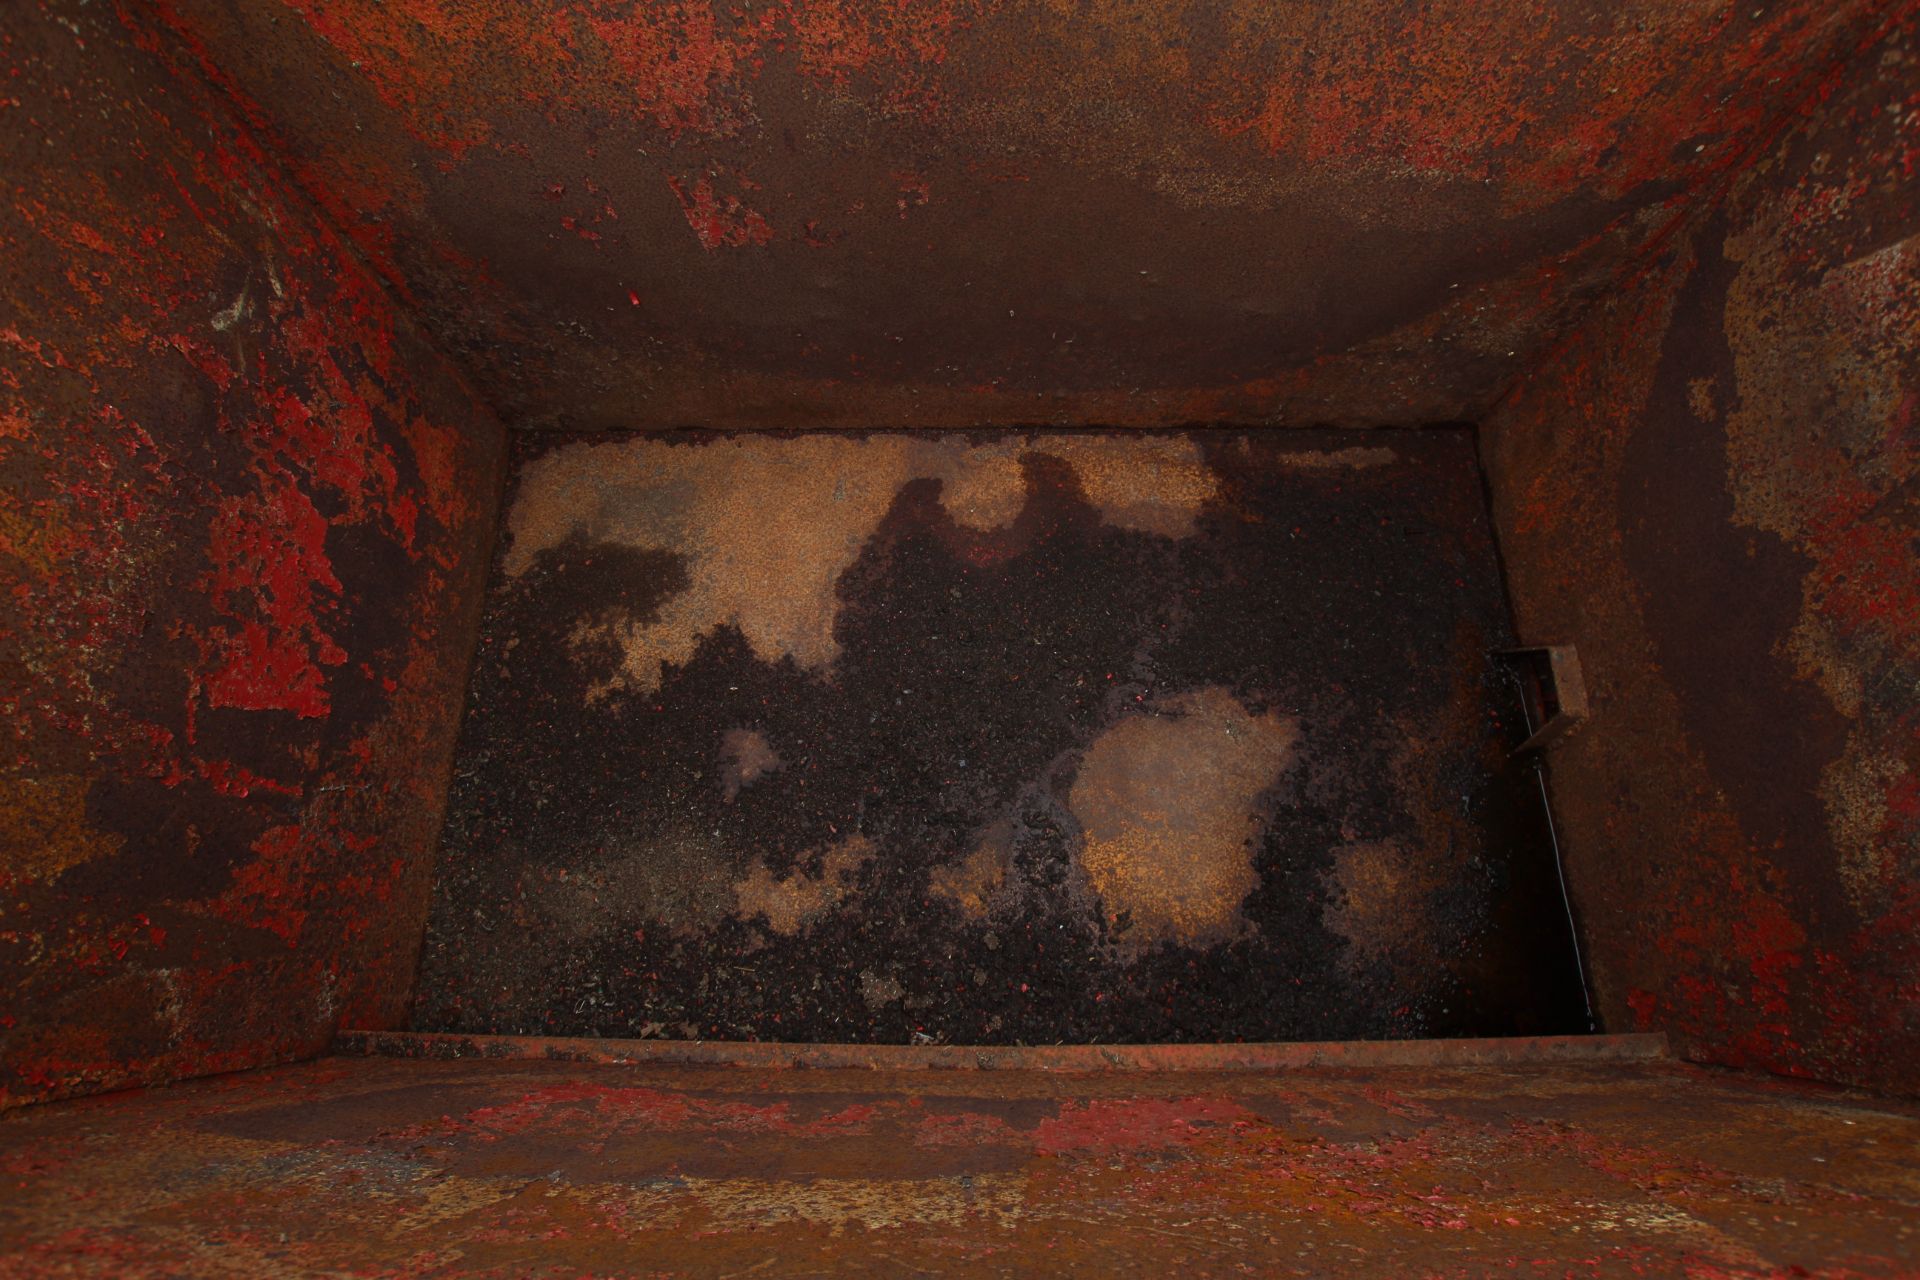 2T grain bin with bottom opening flap. - Image 5 of 5